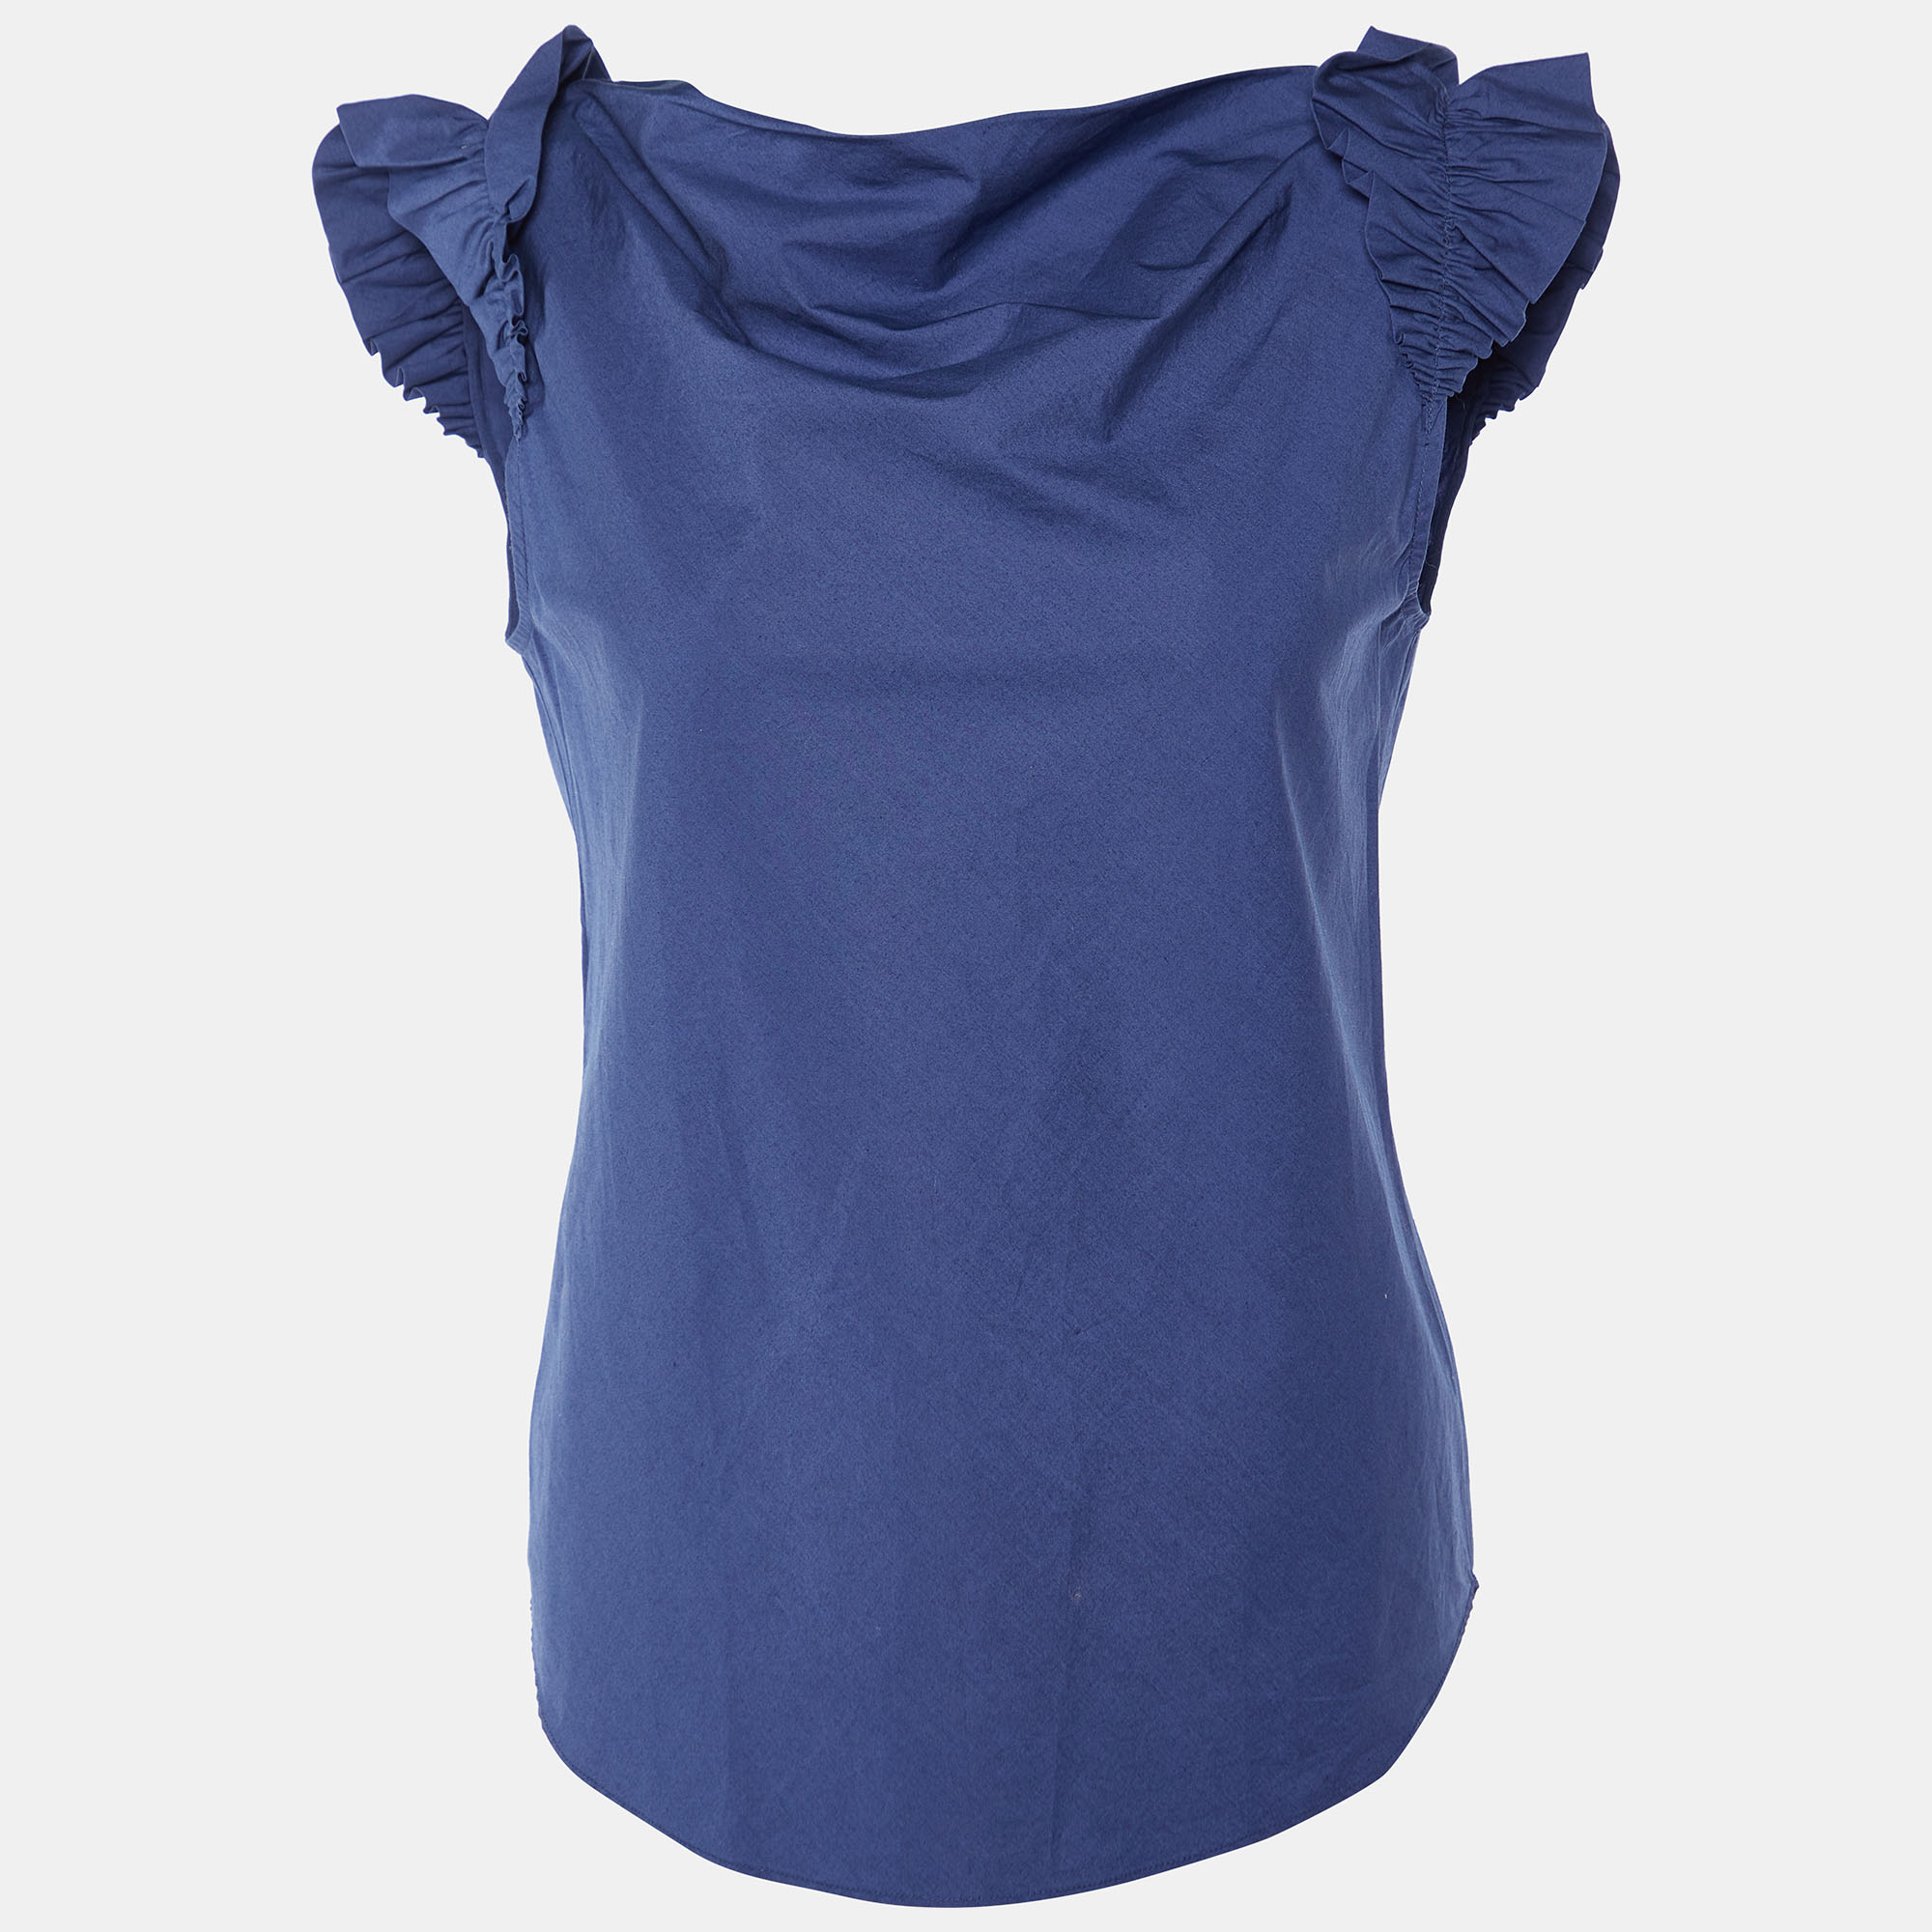 

Moschino Cheap and Chic Navy Blue Cotton Ruffle Sleeve Detail Top